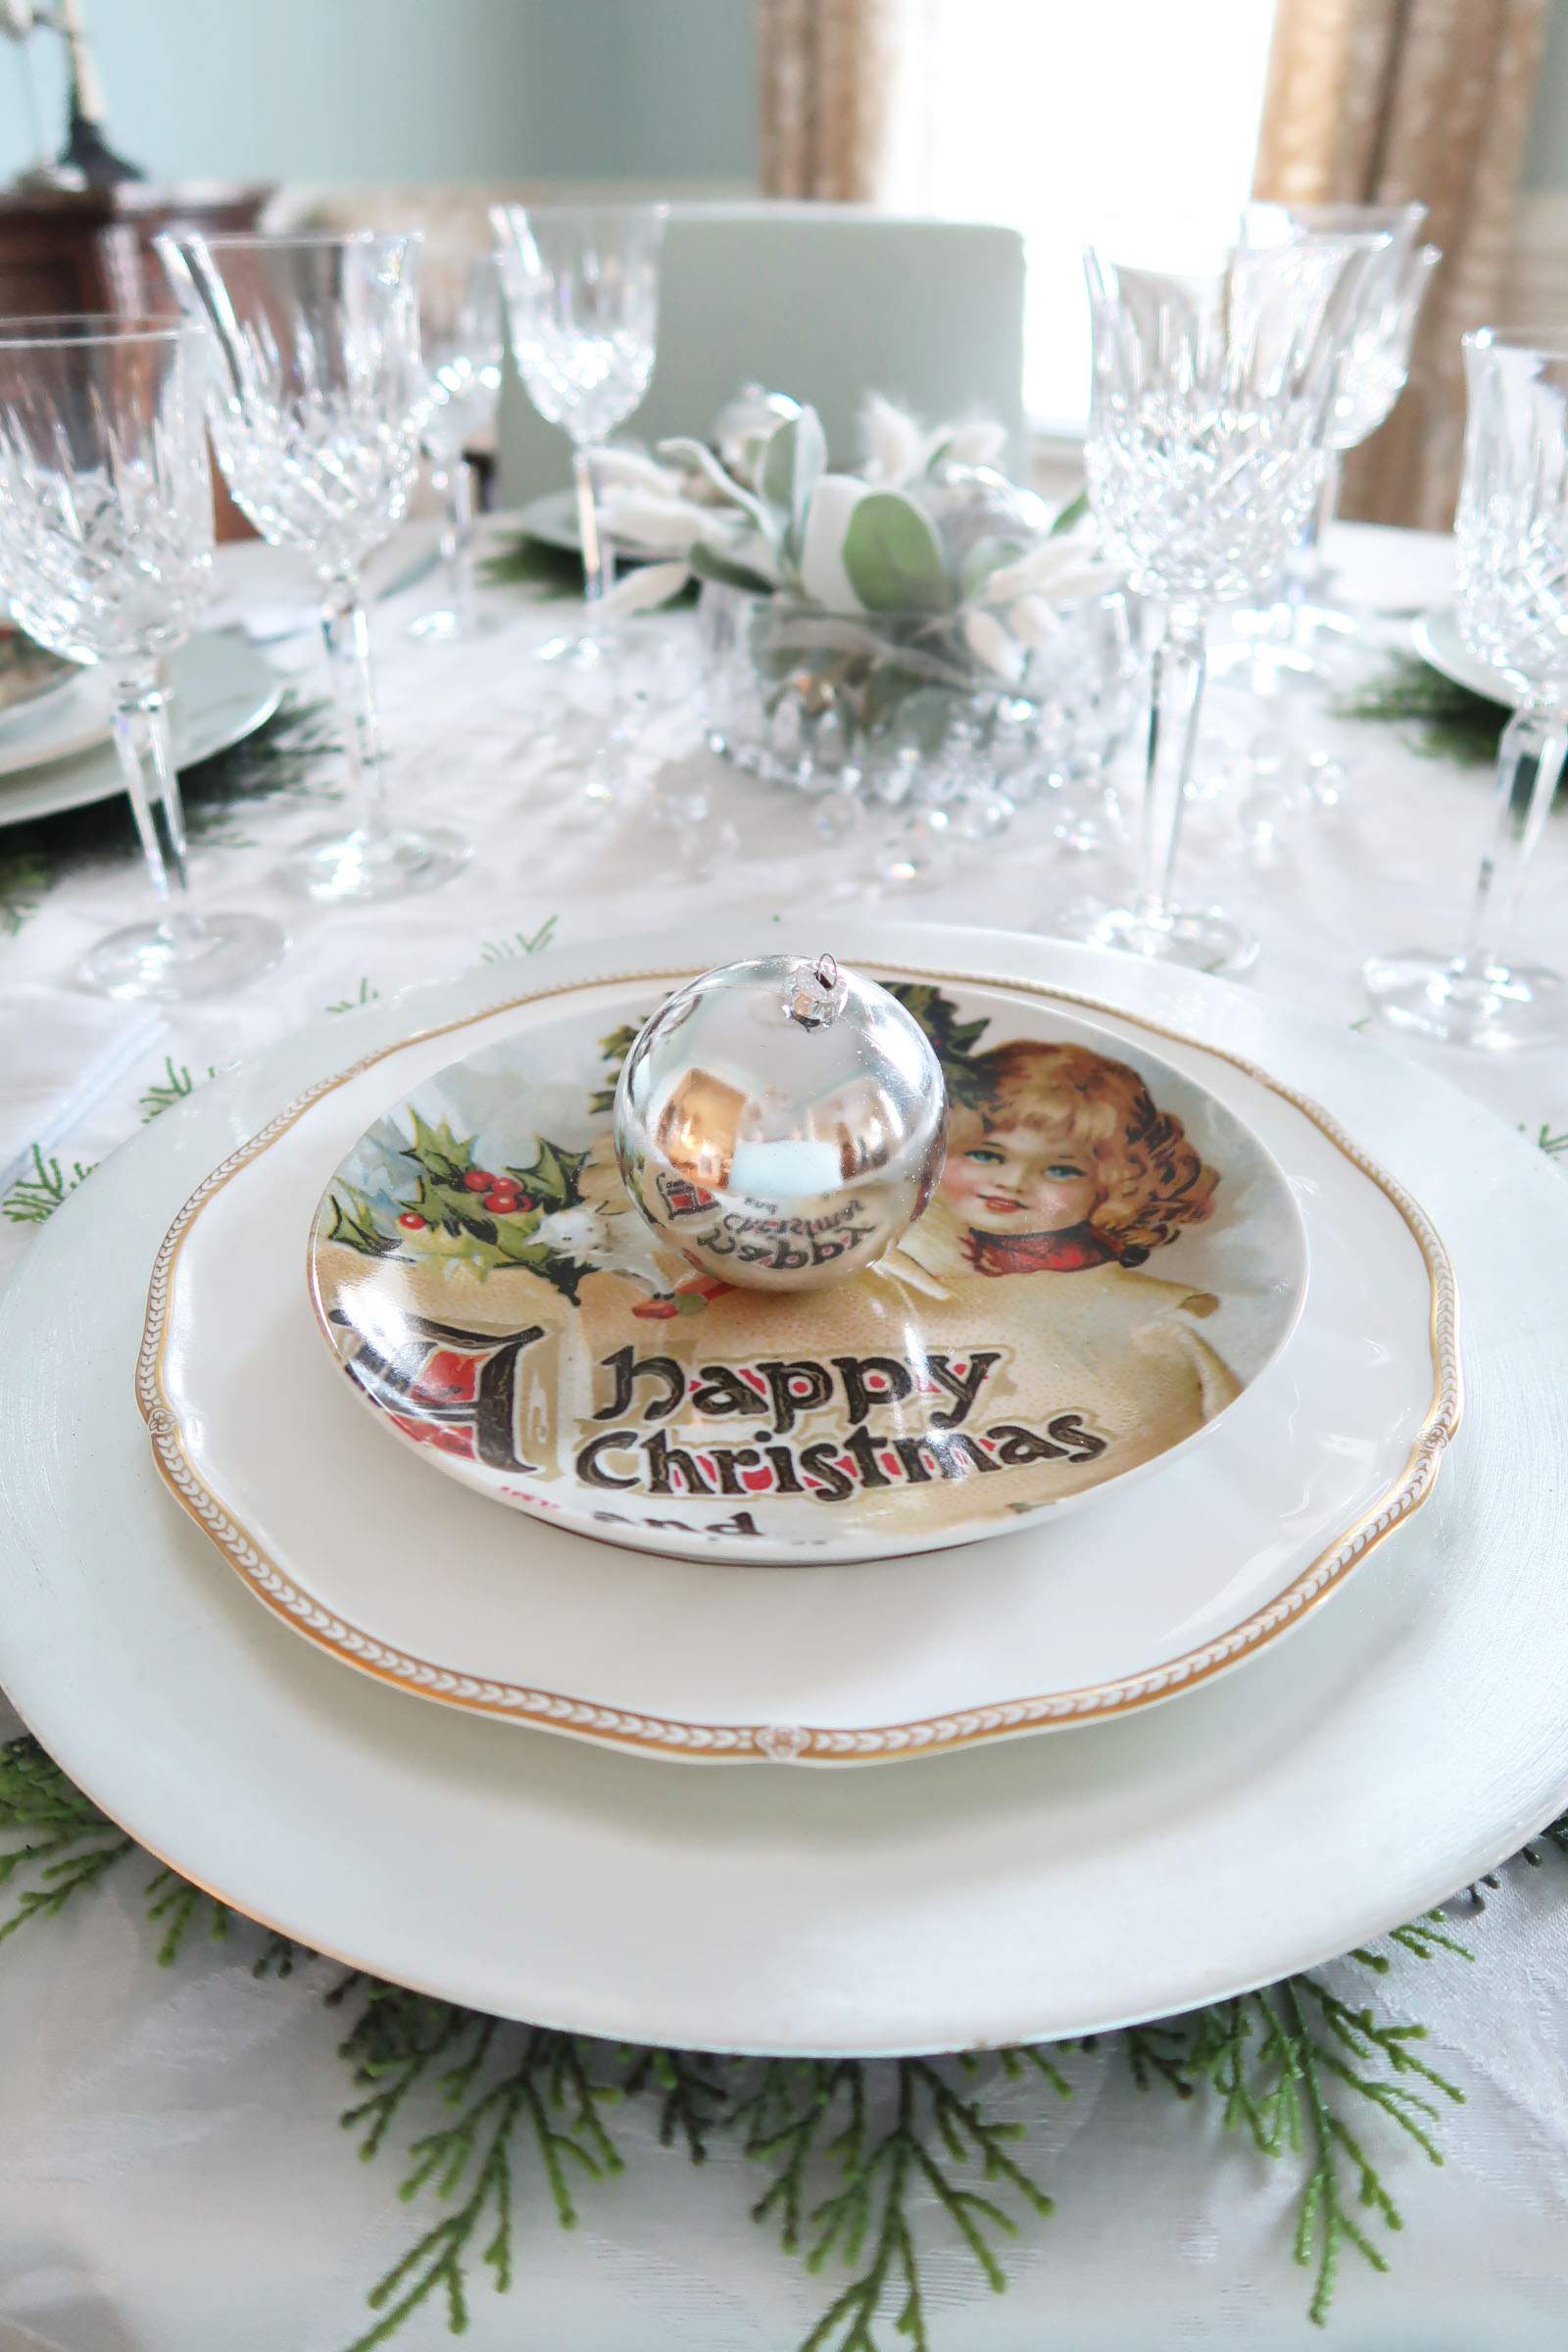 Happy Christmas Place Setting